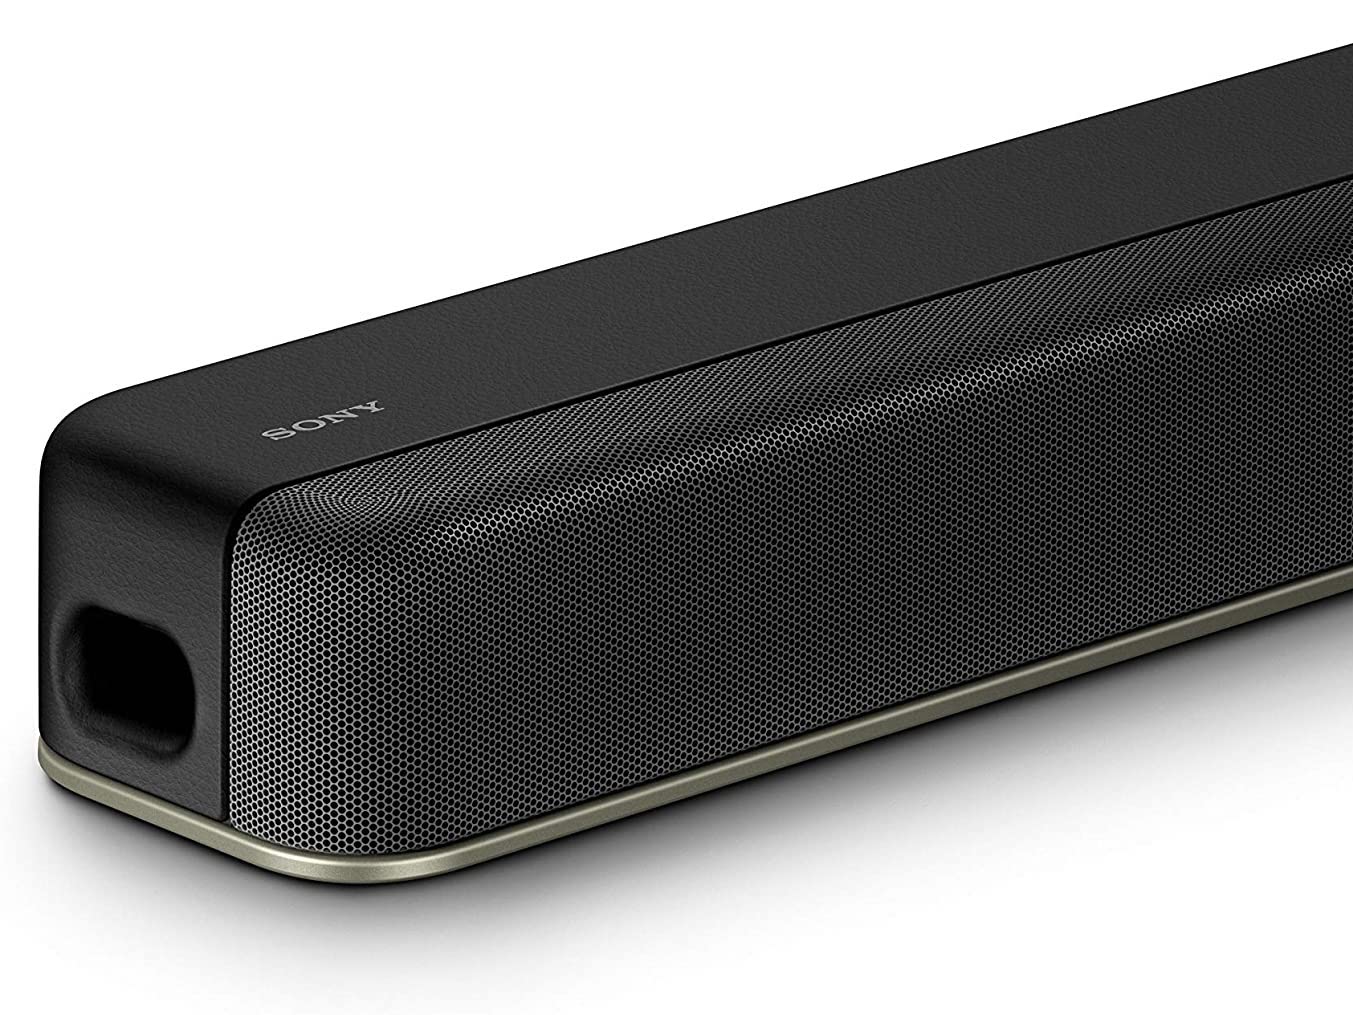 Sony HT-X8500 soundbar with Dolby Atmos and 4K passthrough now on